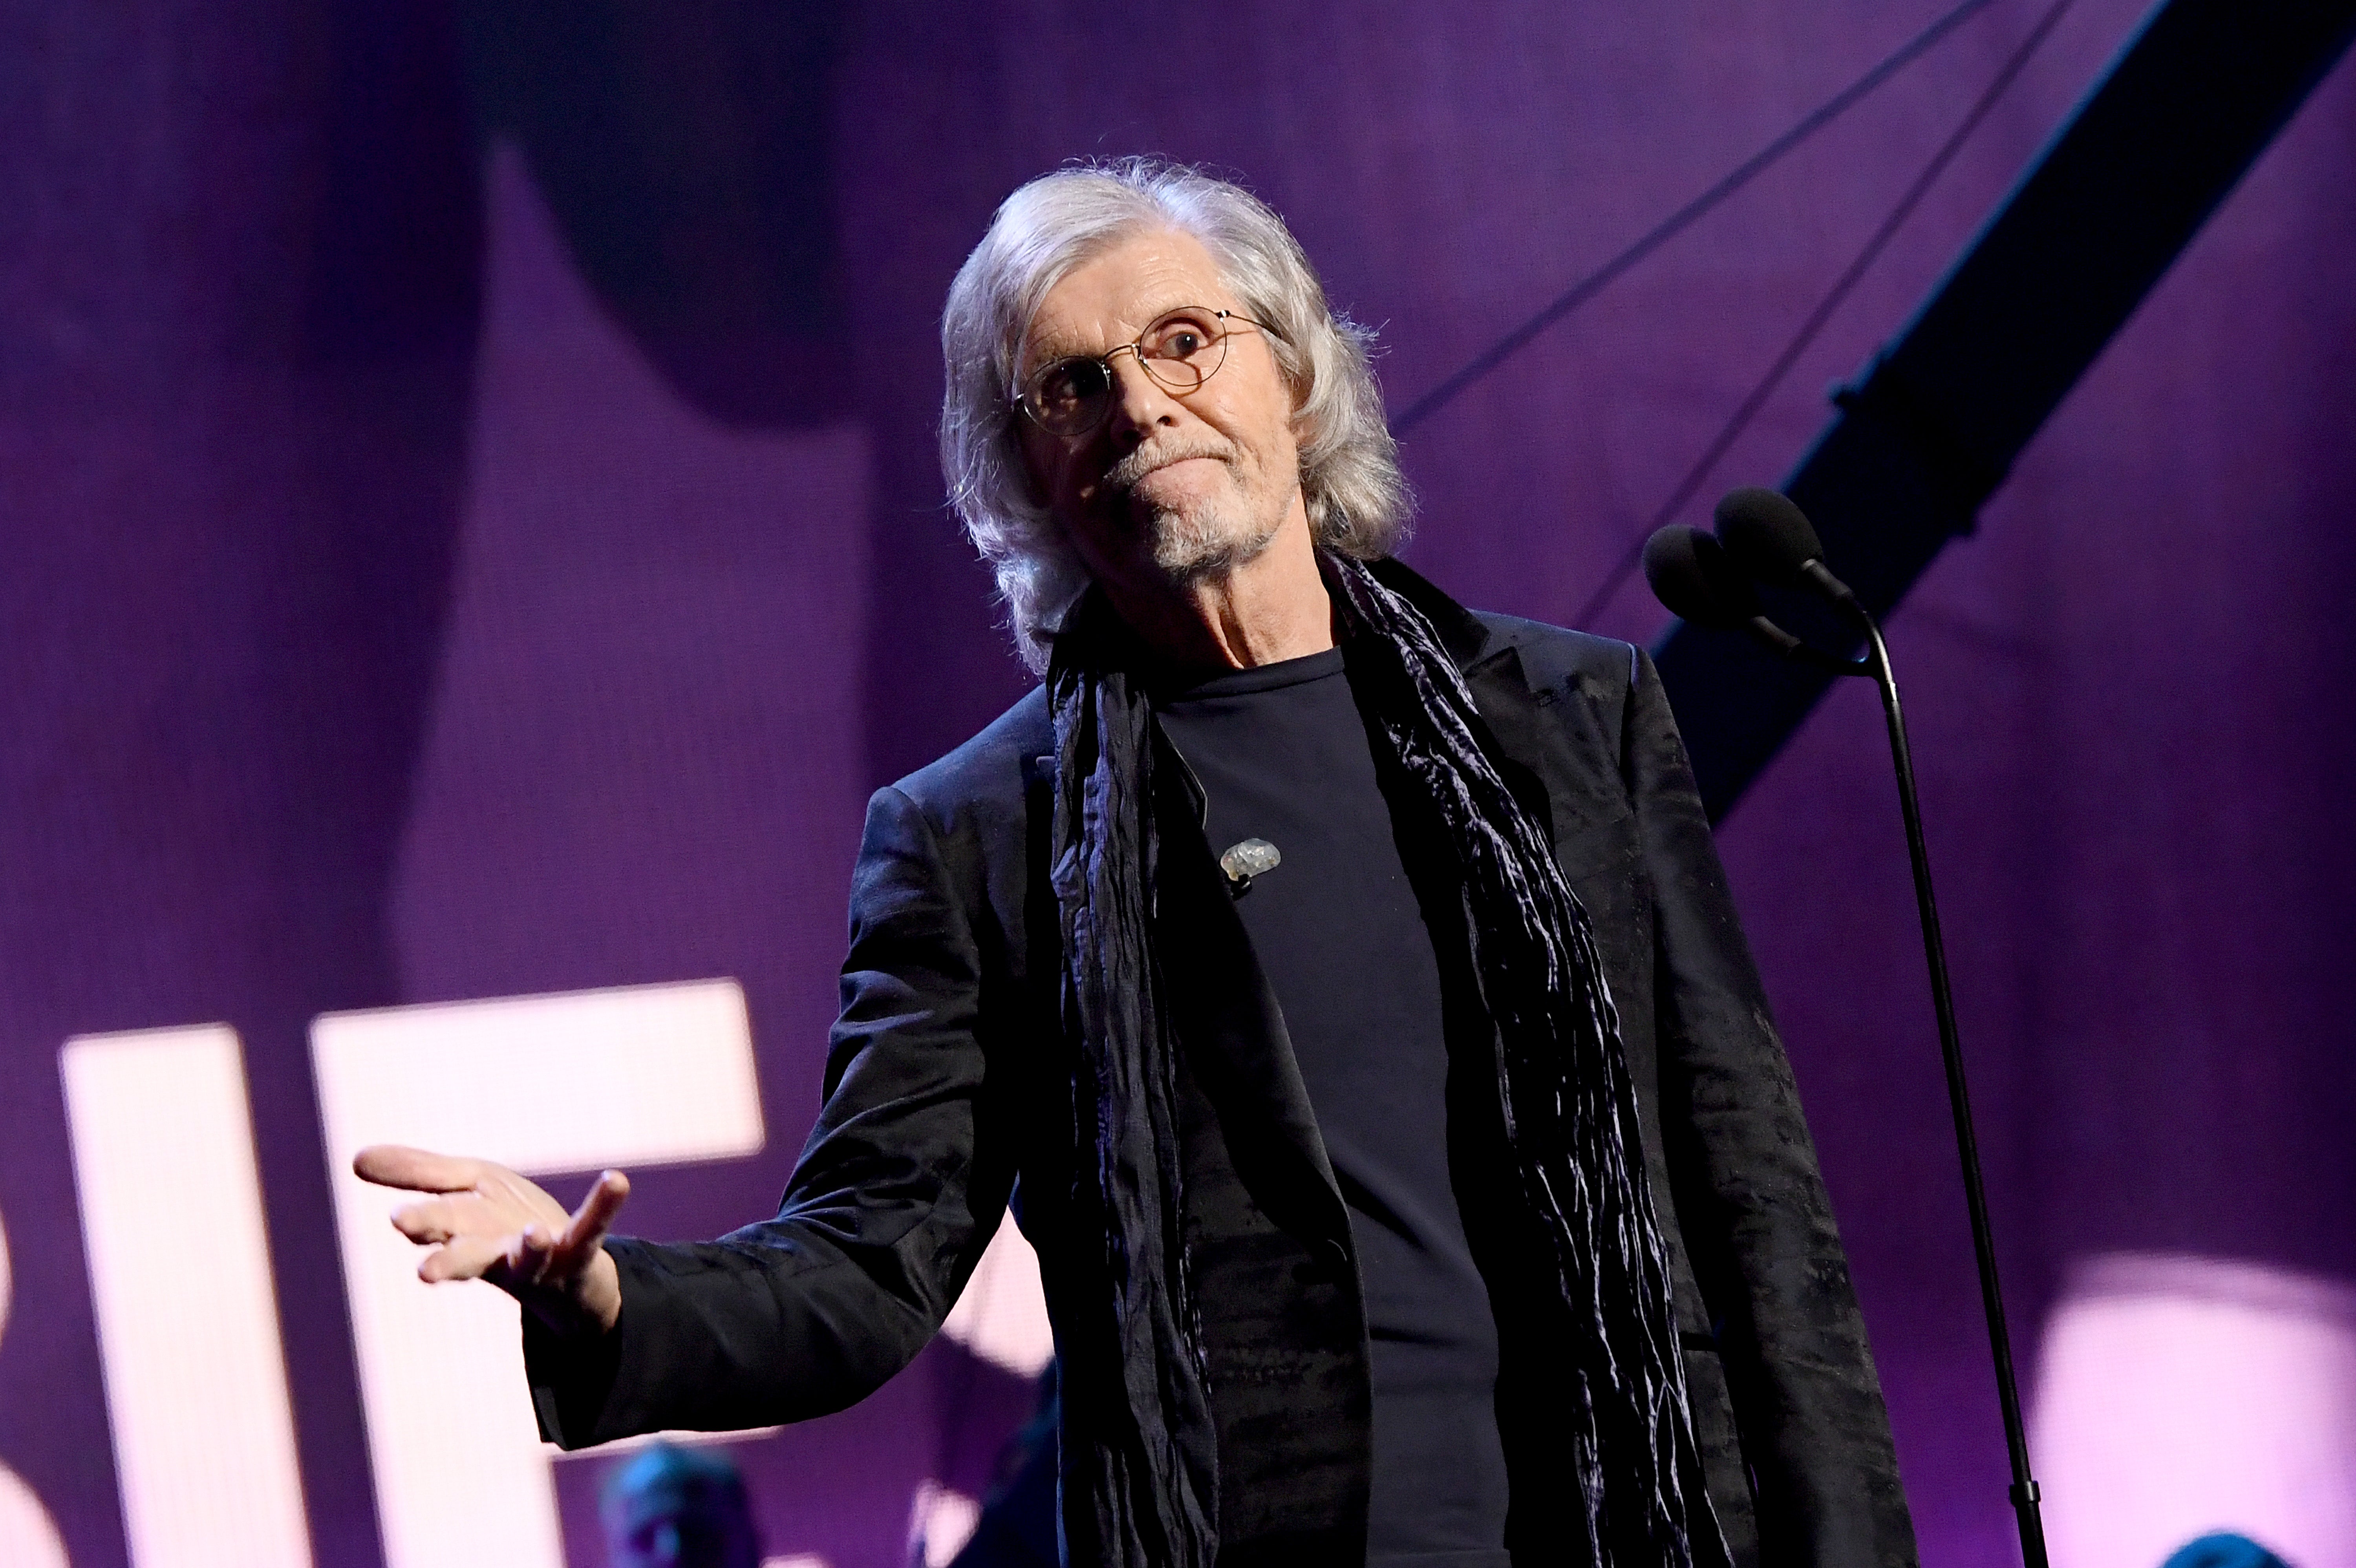 Rod Argent at The Zombies’ induction into the Rock & Roll Hall Of Fame in 2019